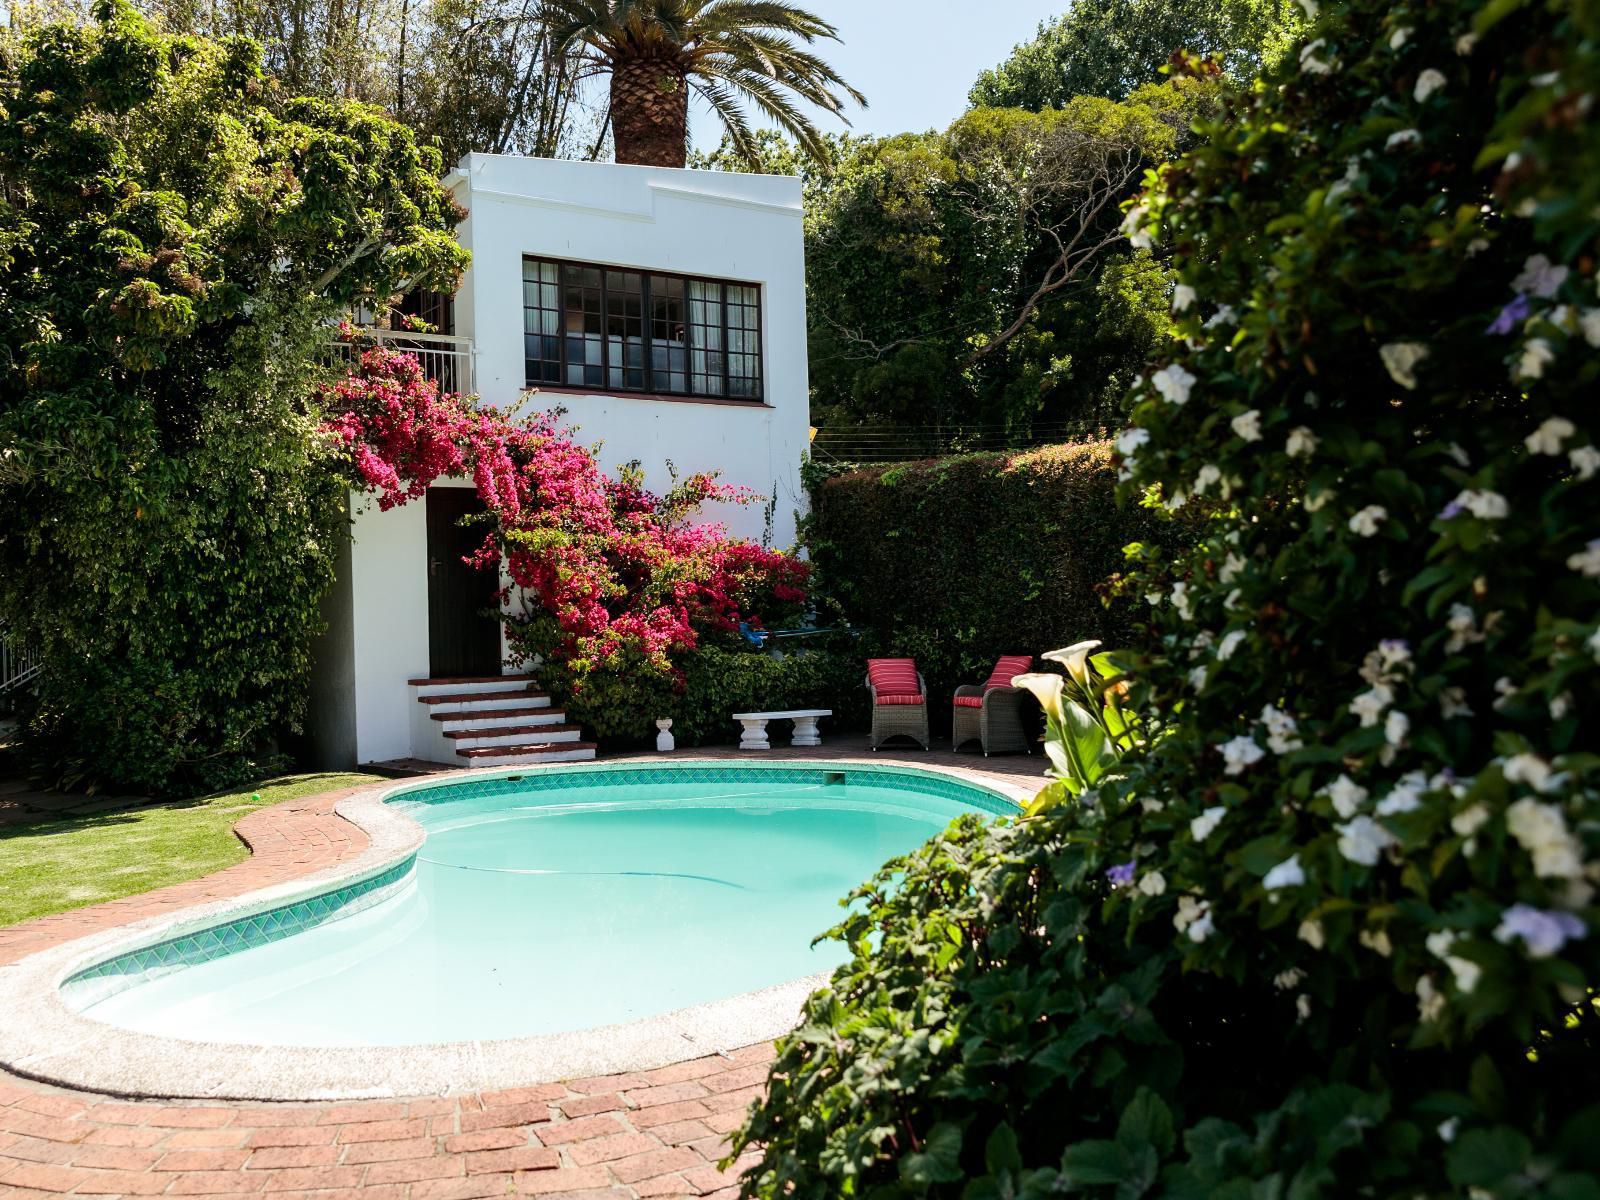 Hillingdale On Alexandra Wynberg Cape Town Western Cape South Africa House, Building, Architecture, Palm Tree, Plant, Nature, Wood, Garden, Swimming Pool